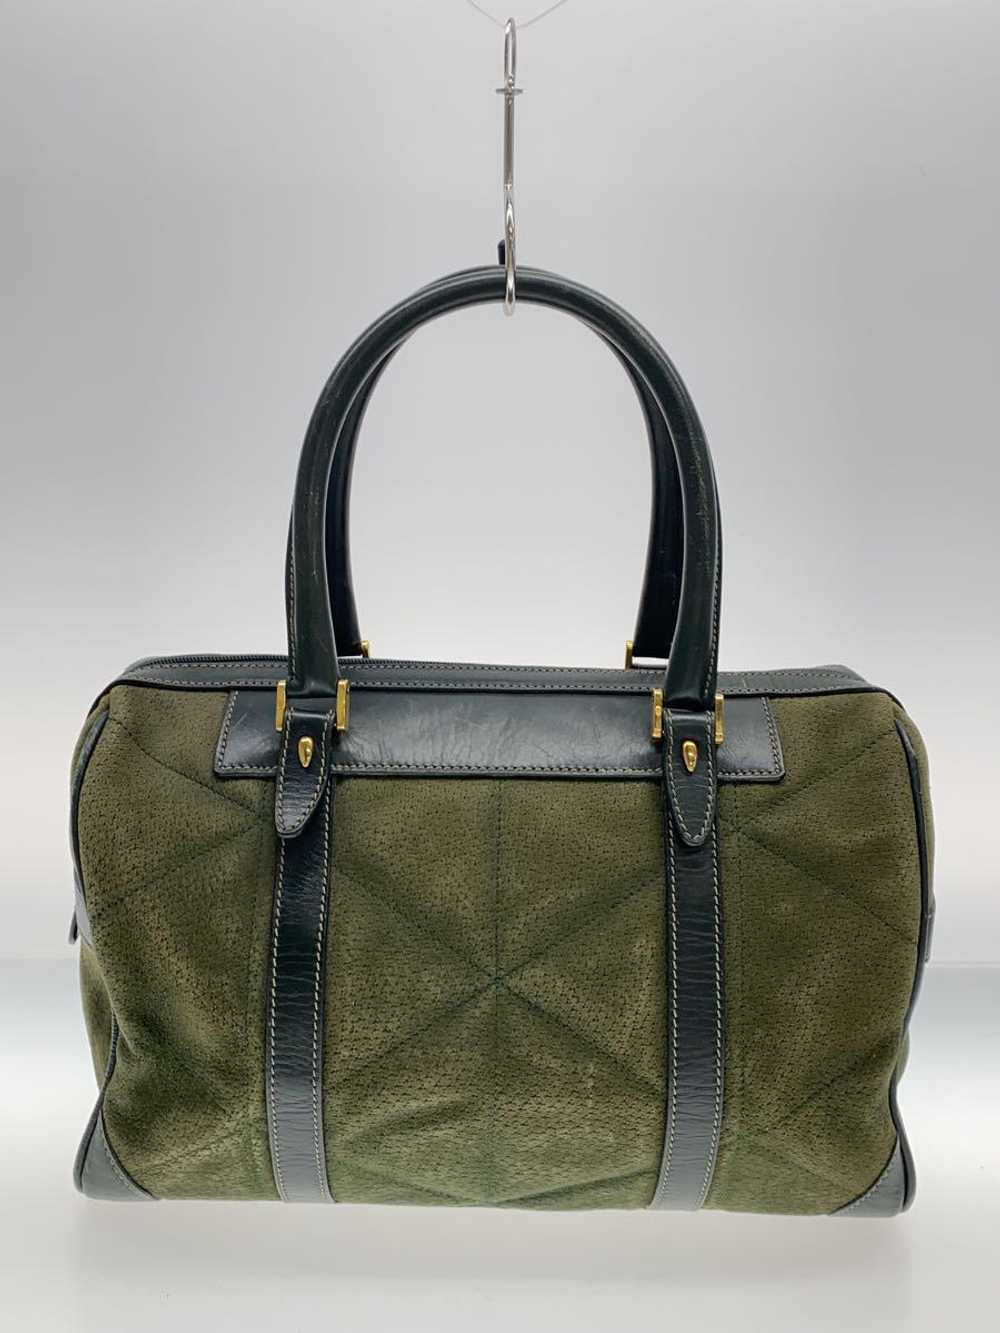 Used Gucci Boston Bag/Suede/Grn Bag - image 3